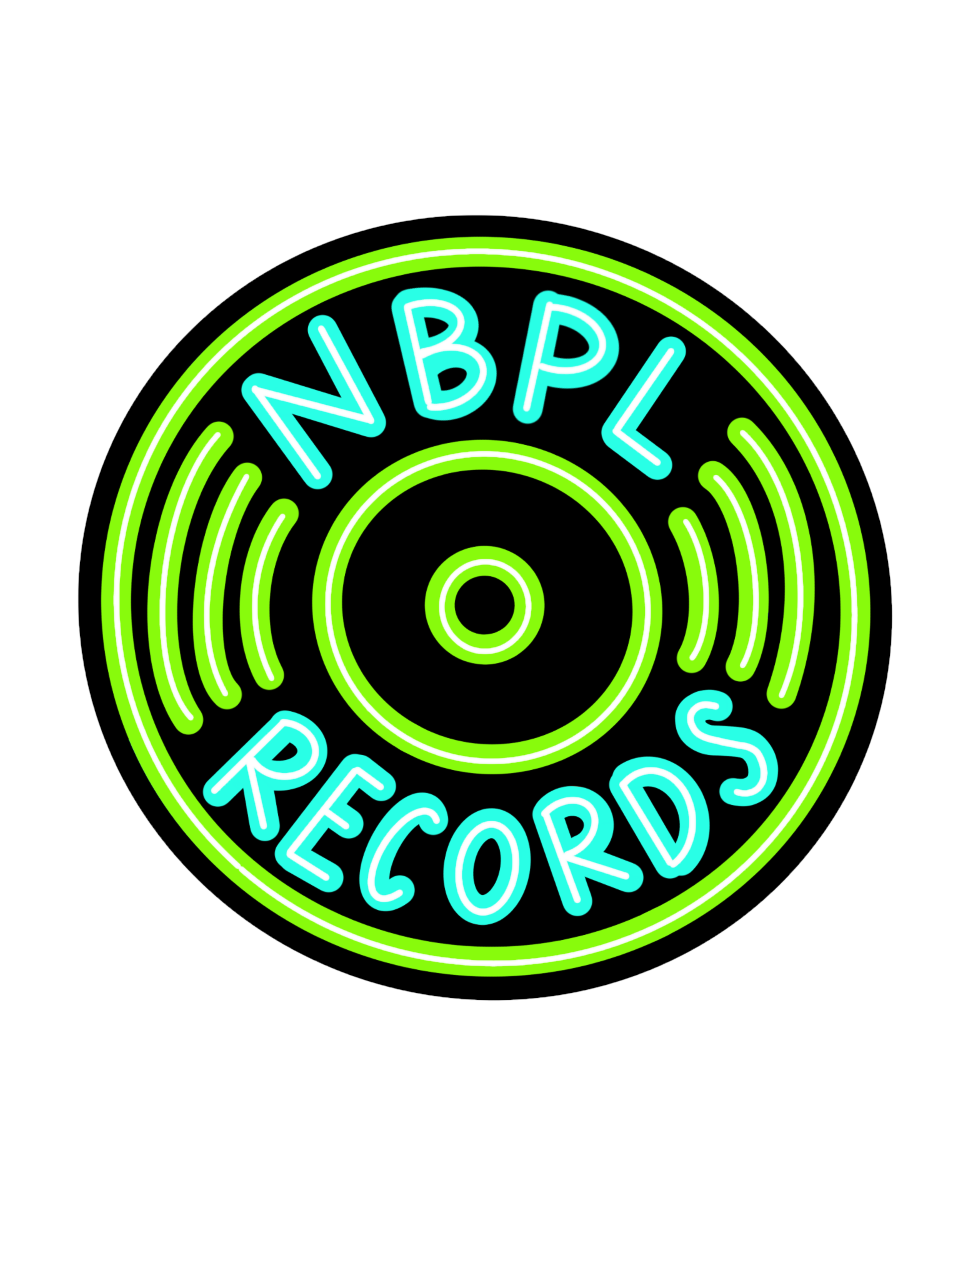 Drawing of a black vinyl record. The grooves are neon green and the words "NBPL" are at the top of the record and "Records" at the bottom"